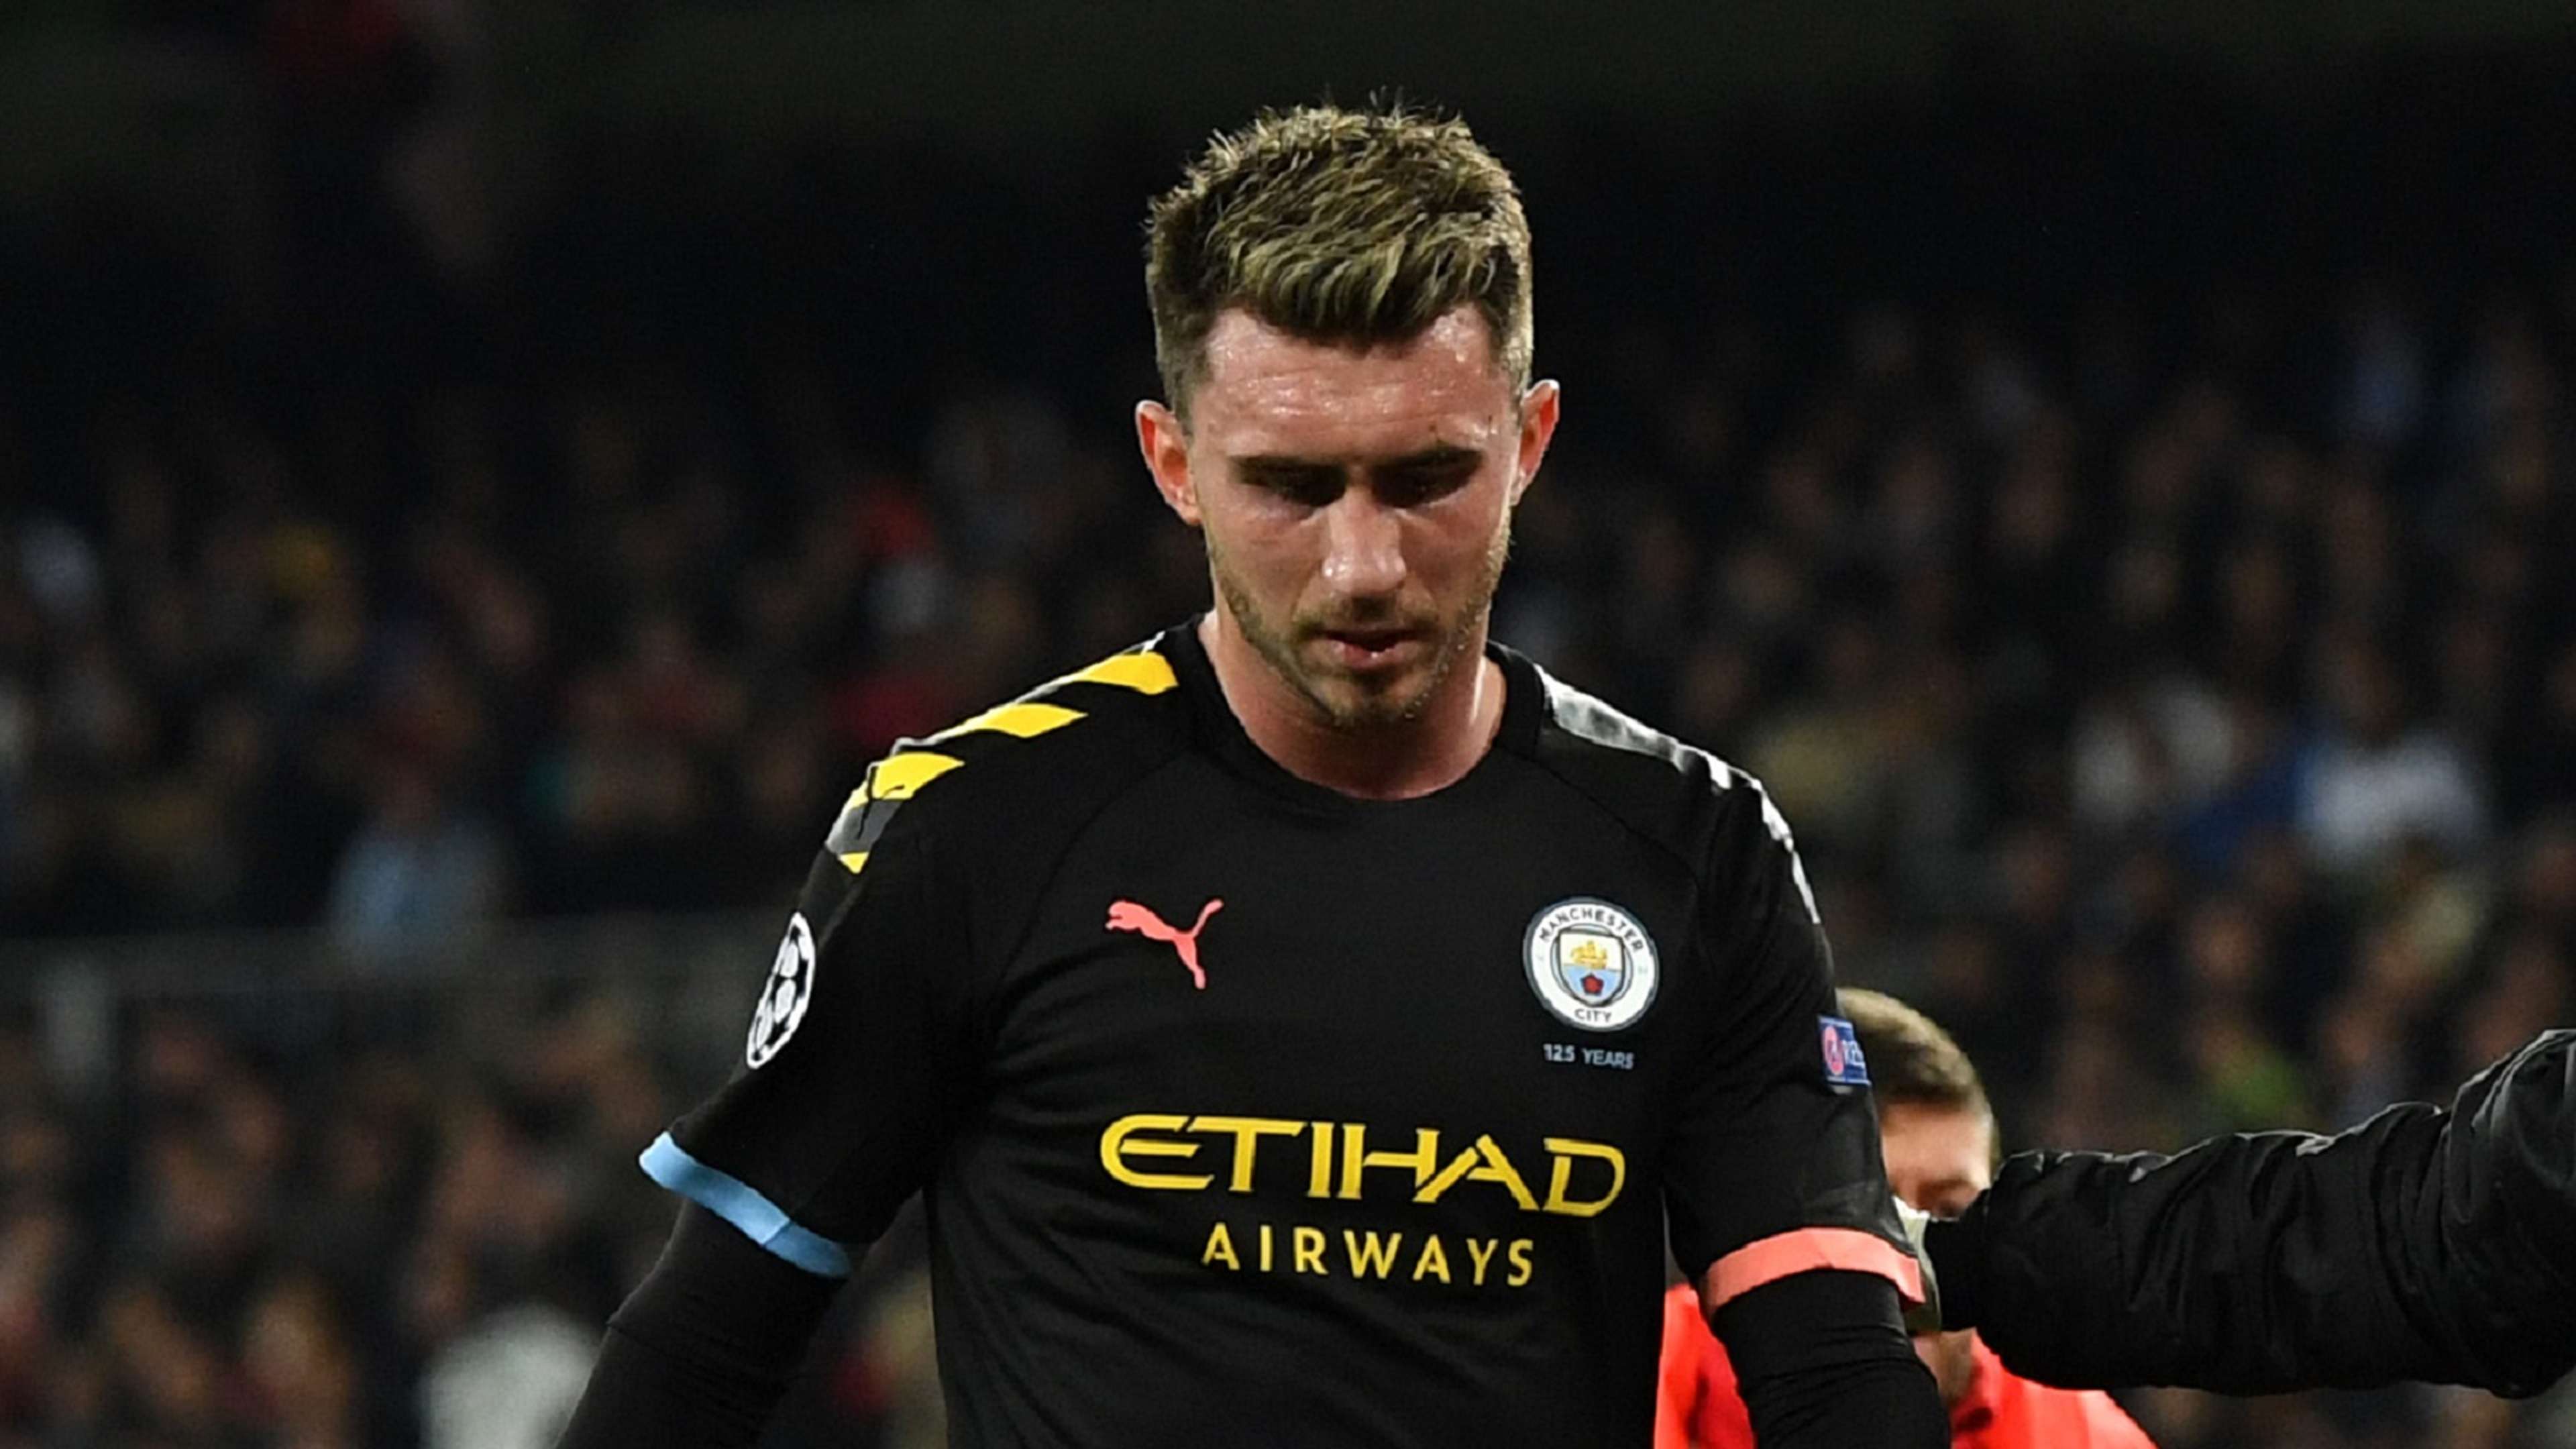 Aymeric Laporte Manchester City Real Madrid 2019-20